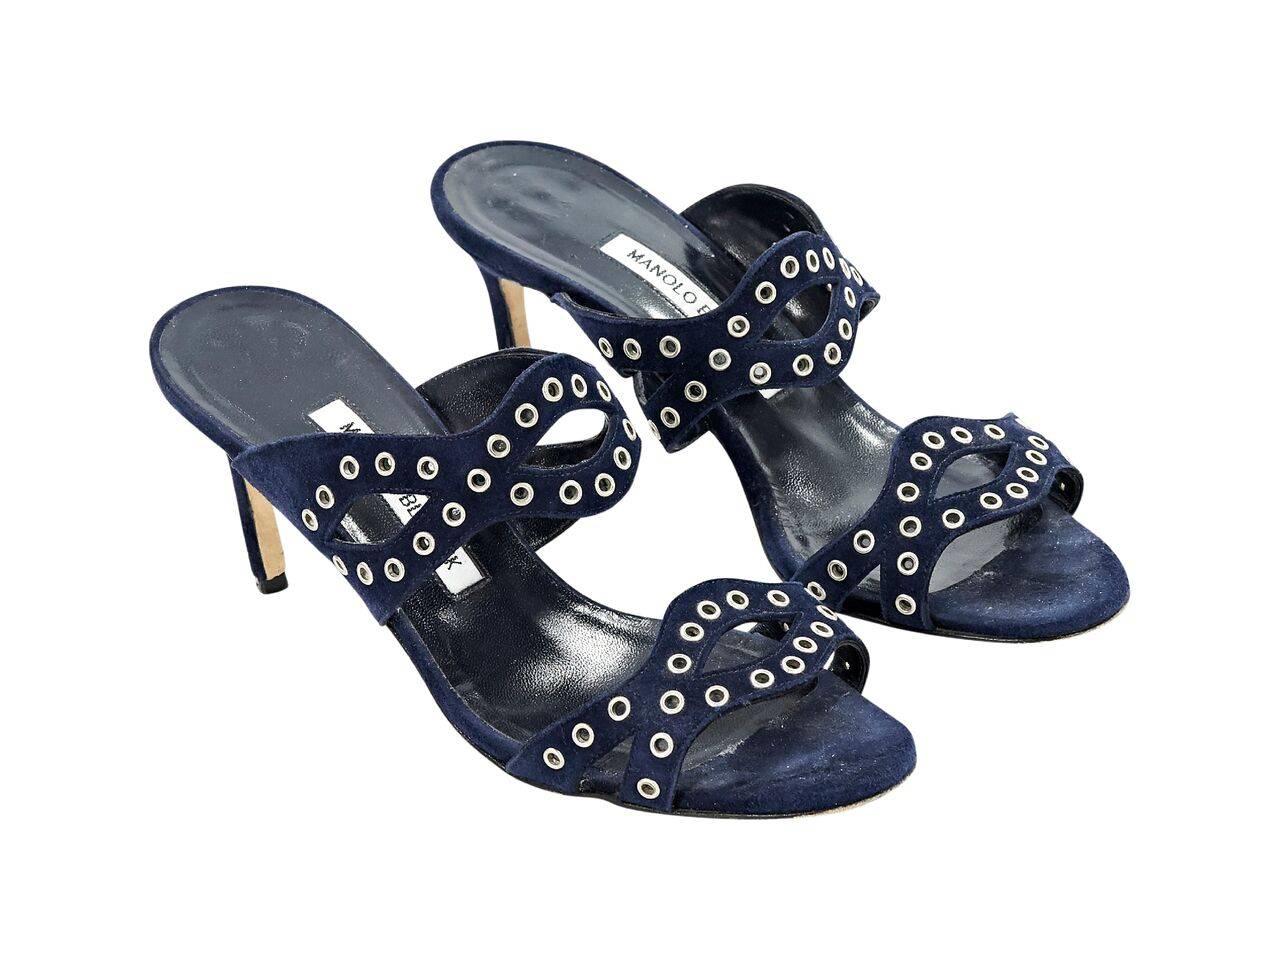 Product details:  Navy blue suede sandals by Manolo Blahnik.  Accented with grommmets.  Open toe.  Slip-on style.  Silvertone hardware. 
Condition: Pre-owned. Very good.
Est. Retail $ 428.00